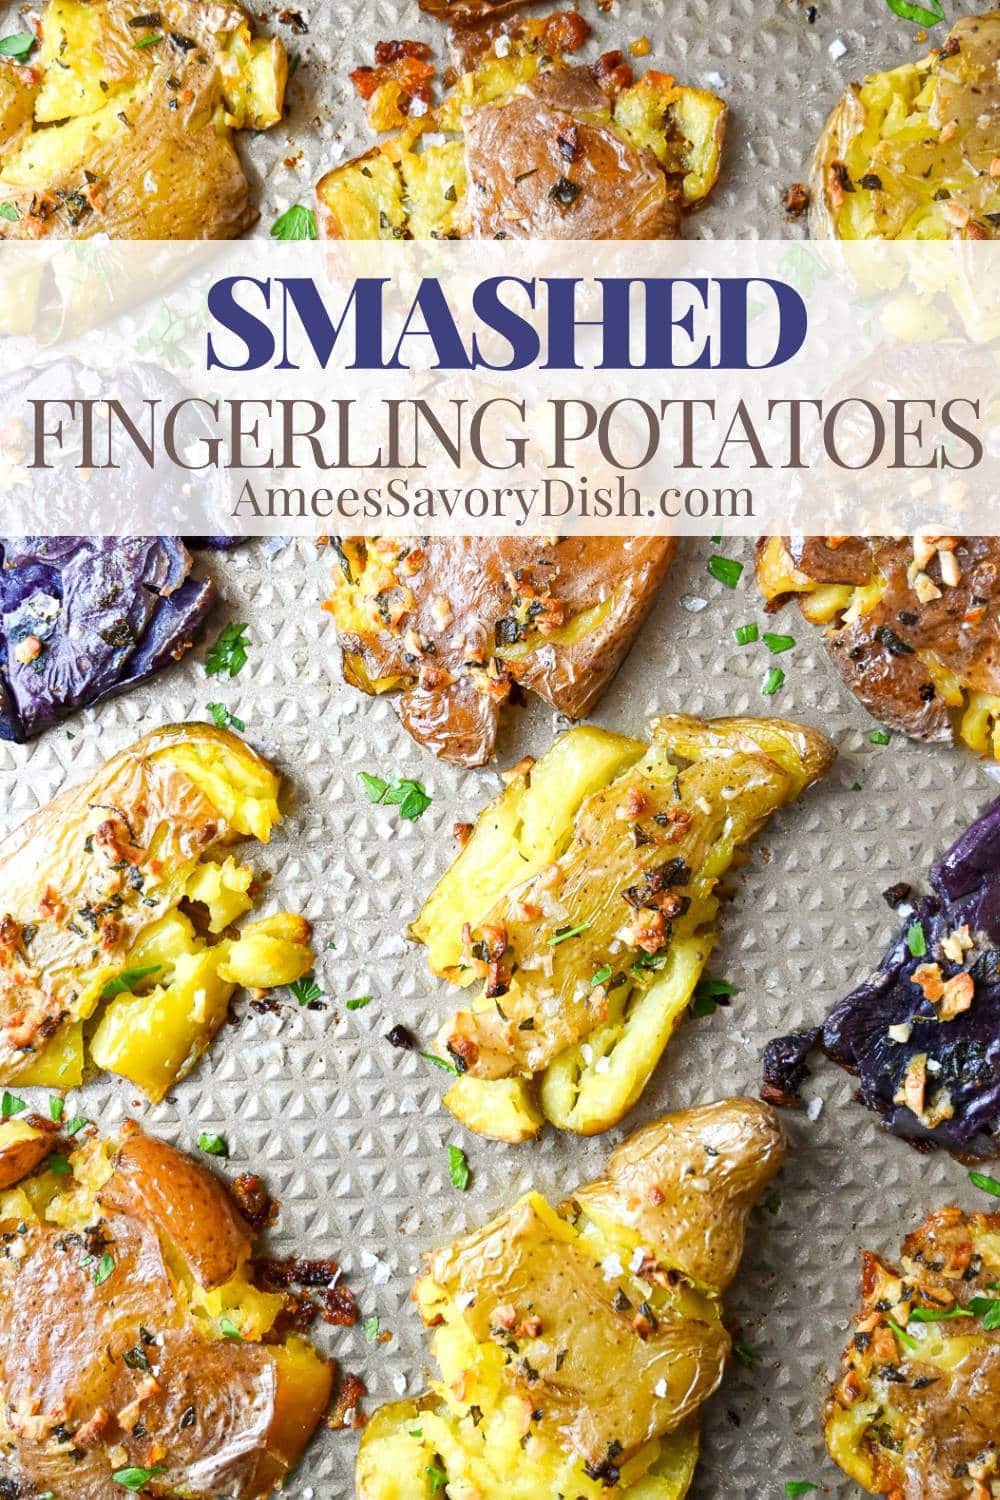 These smashed fingerling potatoes bake up irresistibly crispy on the outside, creamy inside, and packed with Greek-inspired goodness. via @Ameessavorydish